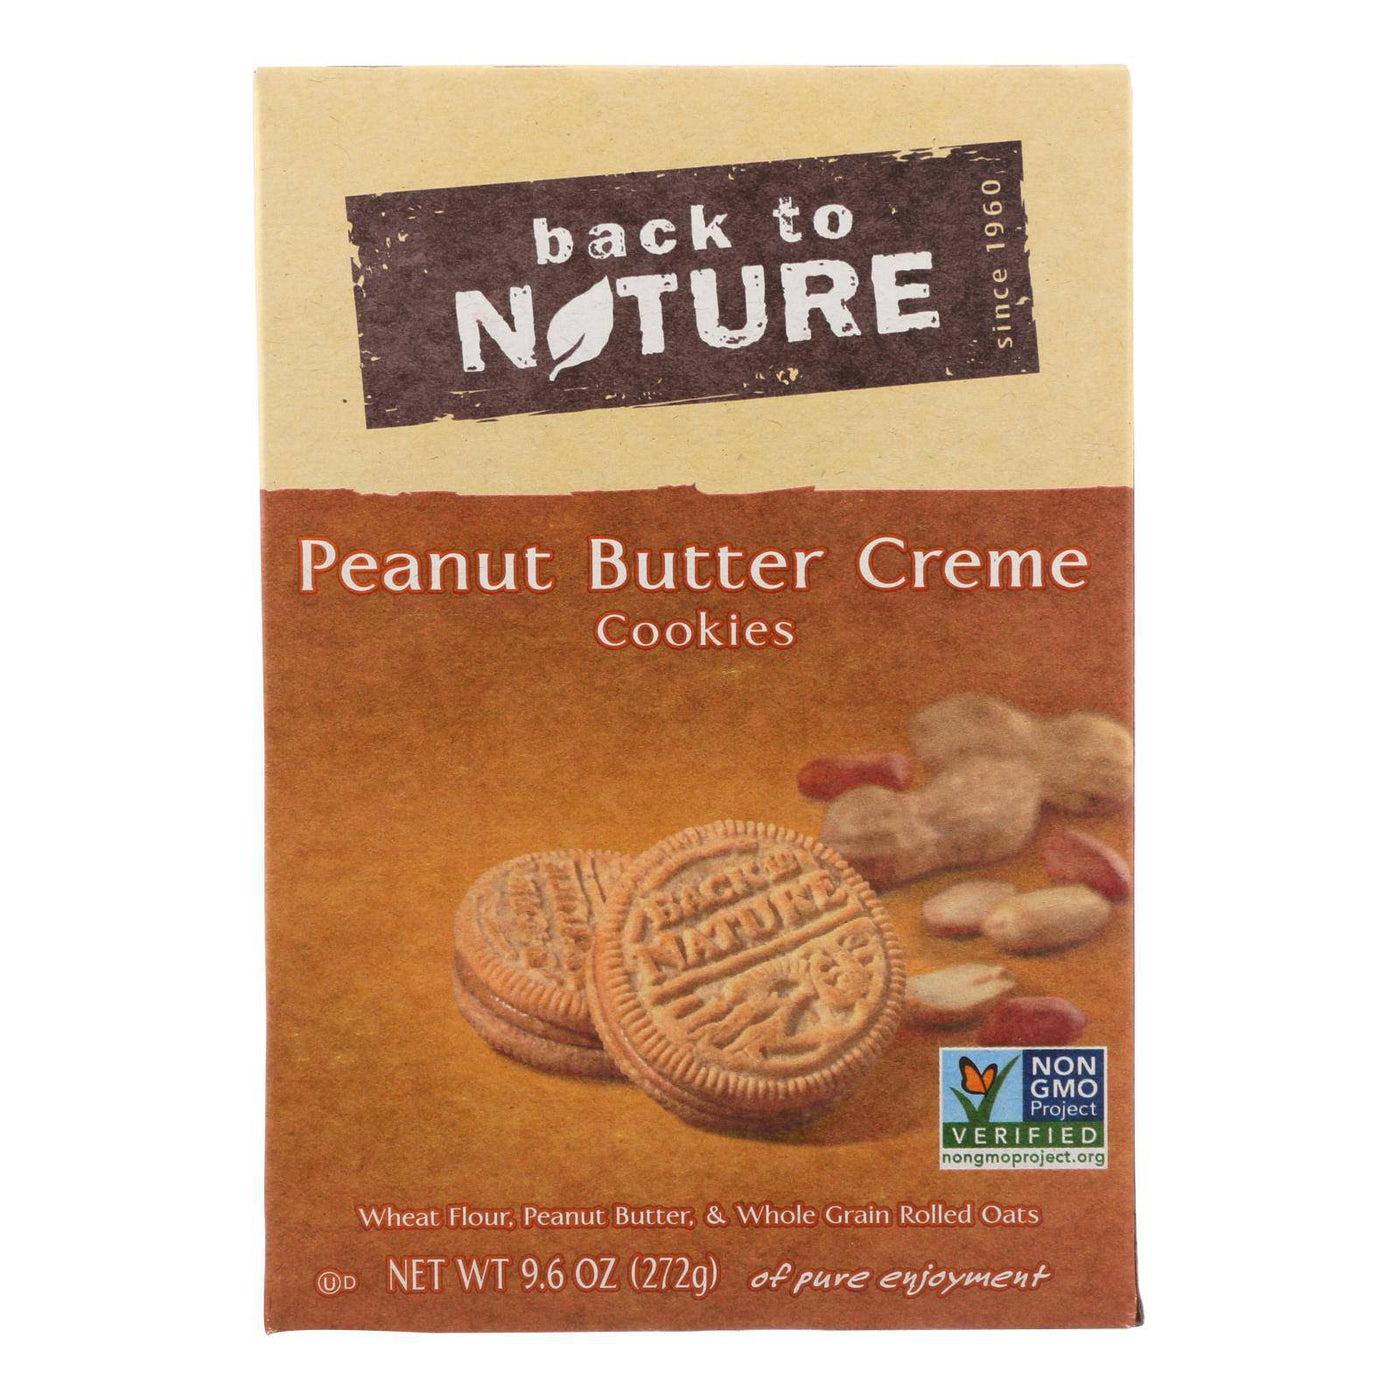 Buy Back To Nature Creme Cookies - Peanut Butter - Case Of 6 - 9.6 Oz.  at OnlyNaturals.us